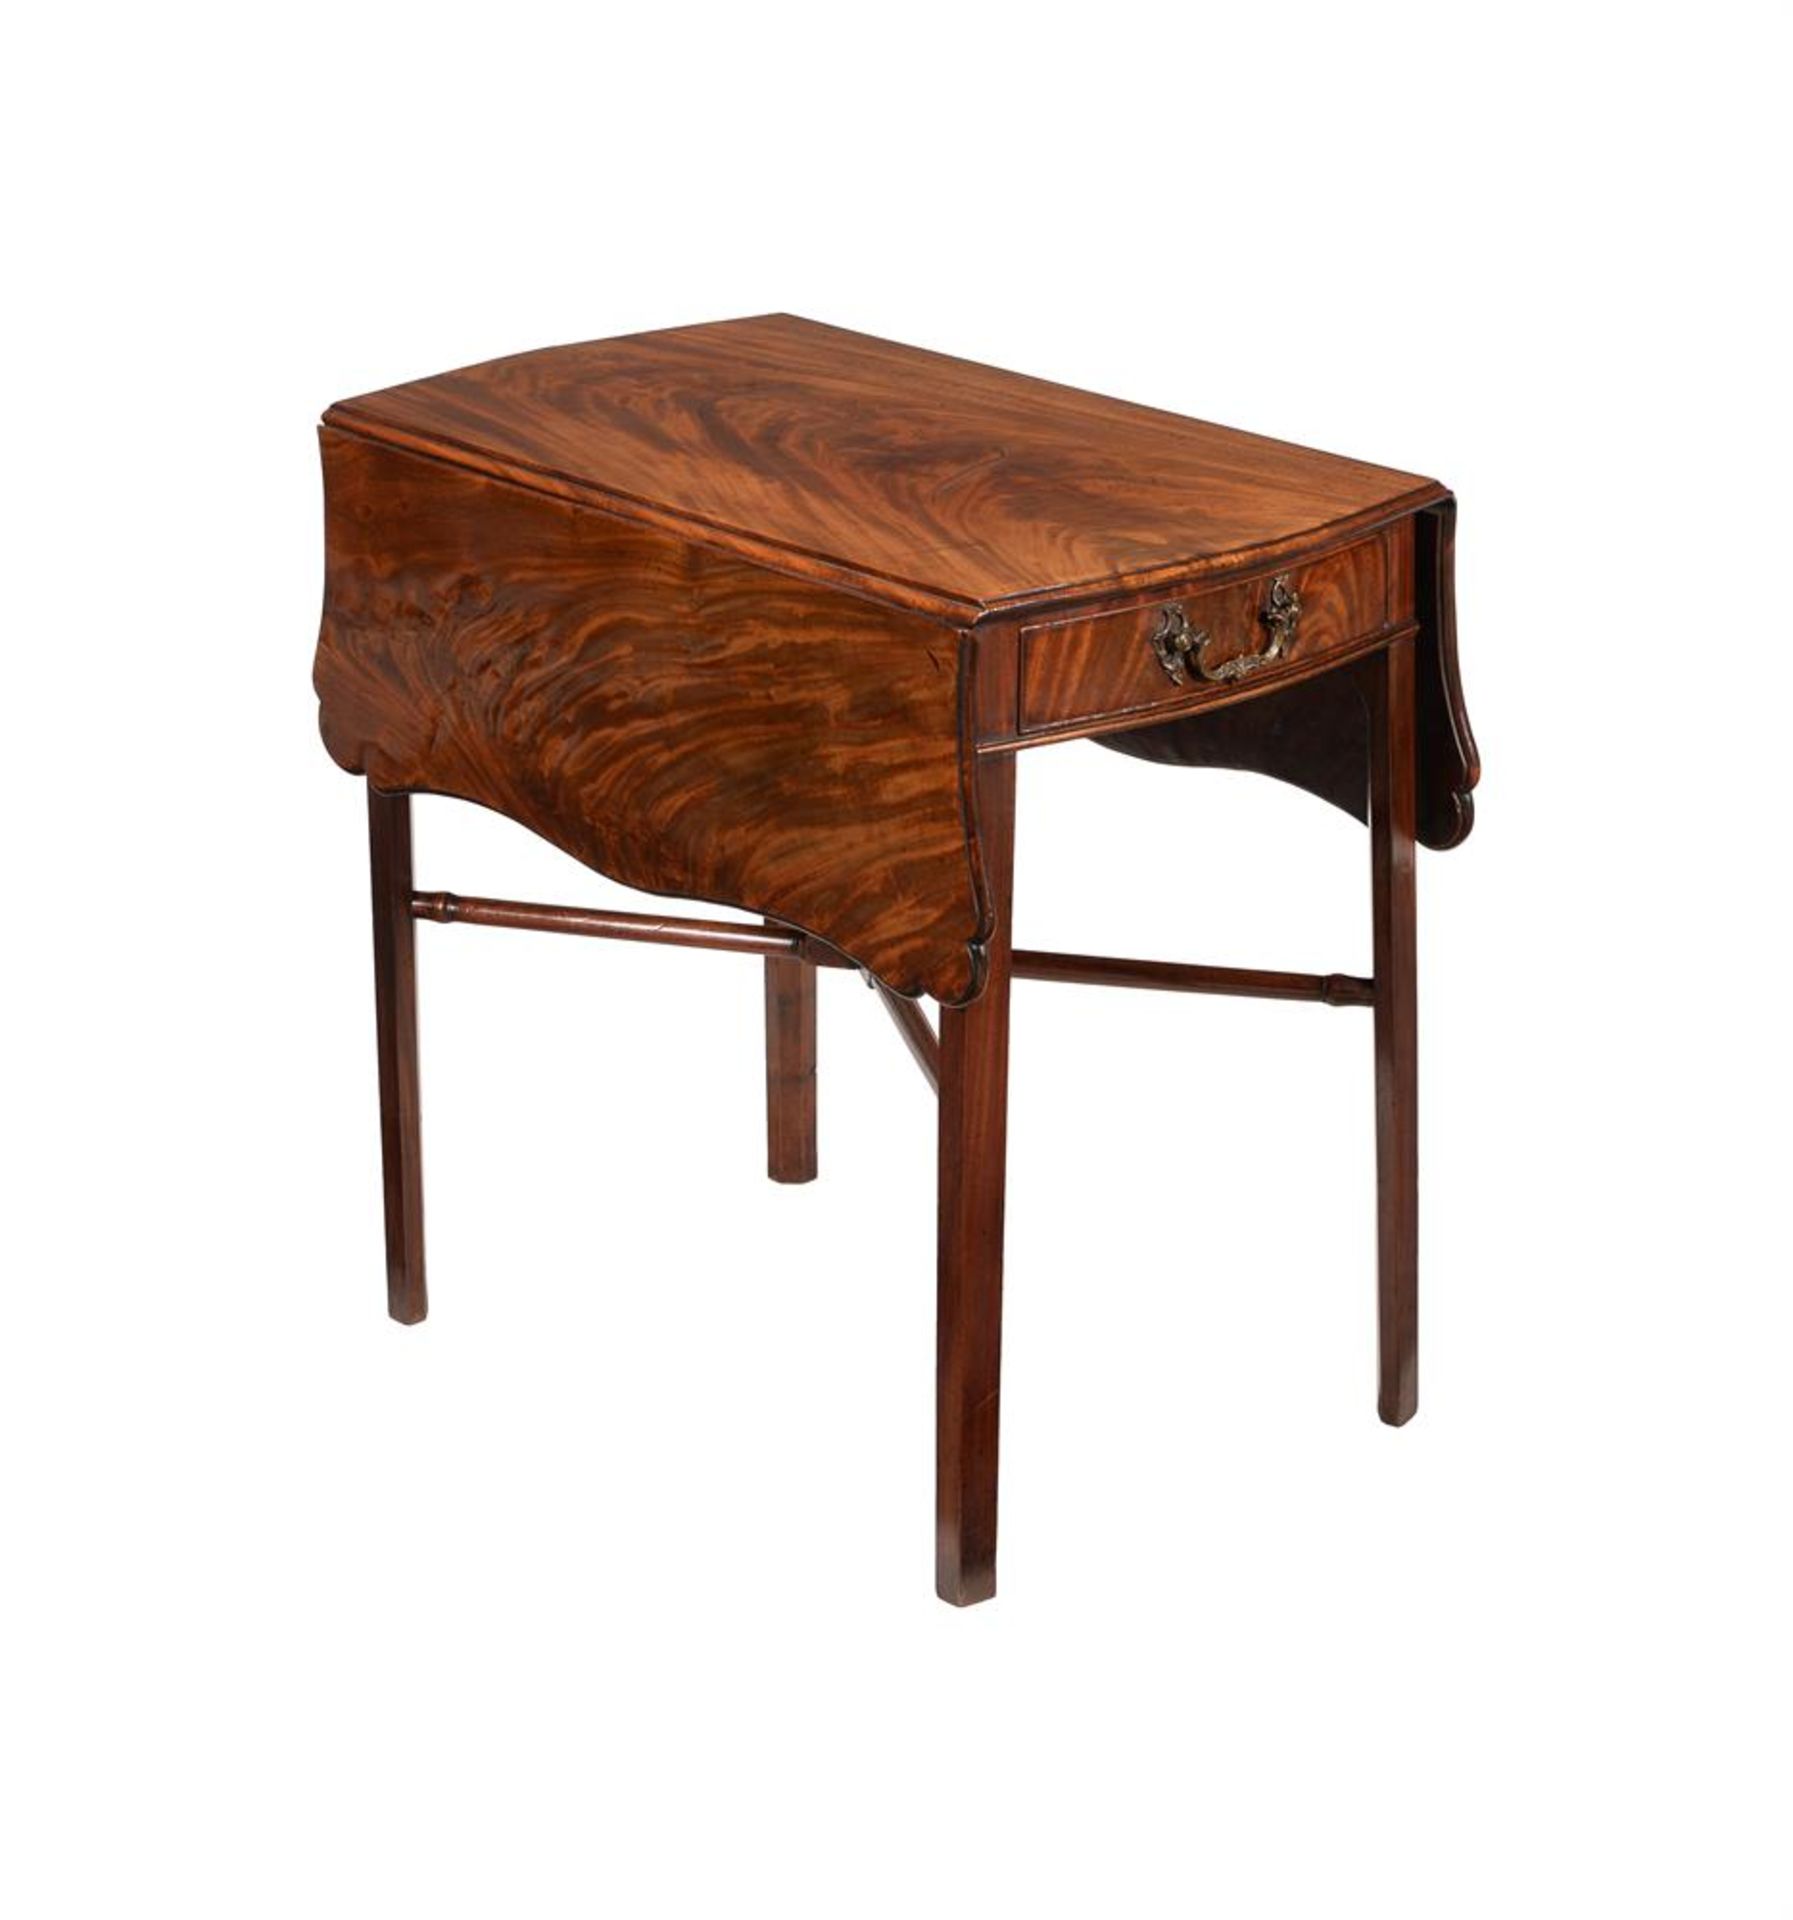 A GEORGE III MAHOGANY BUTTERFLY PEMBROKE TABLE - Image 2 of 3